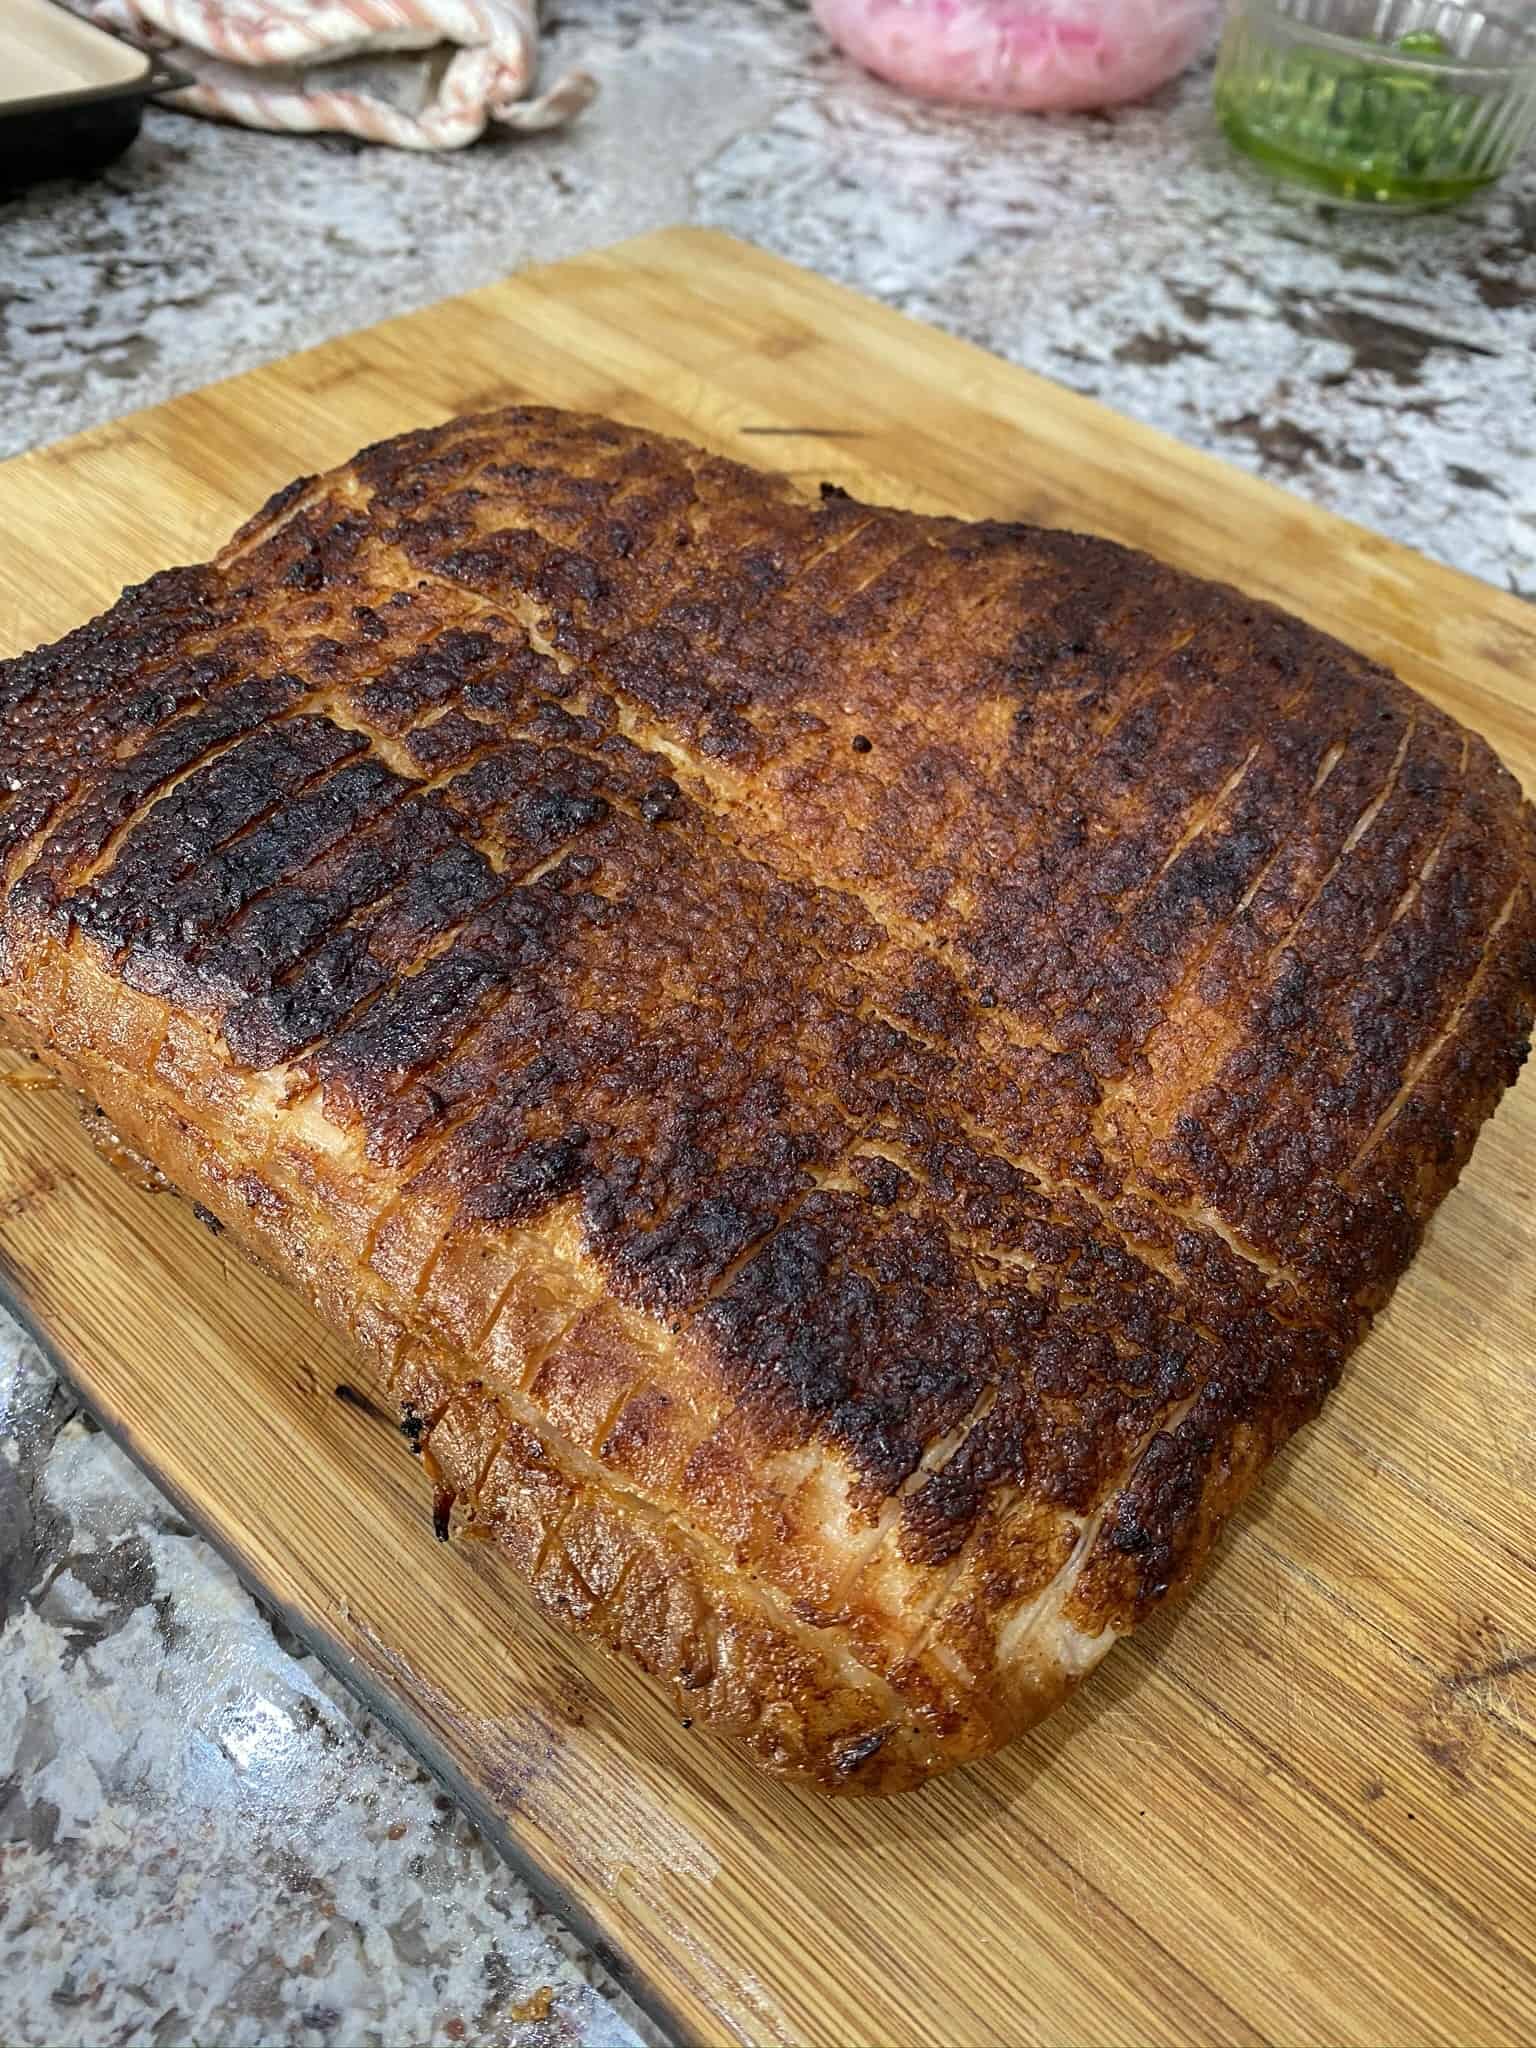 Cooked pork belly